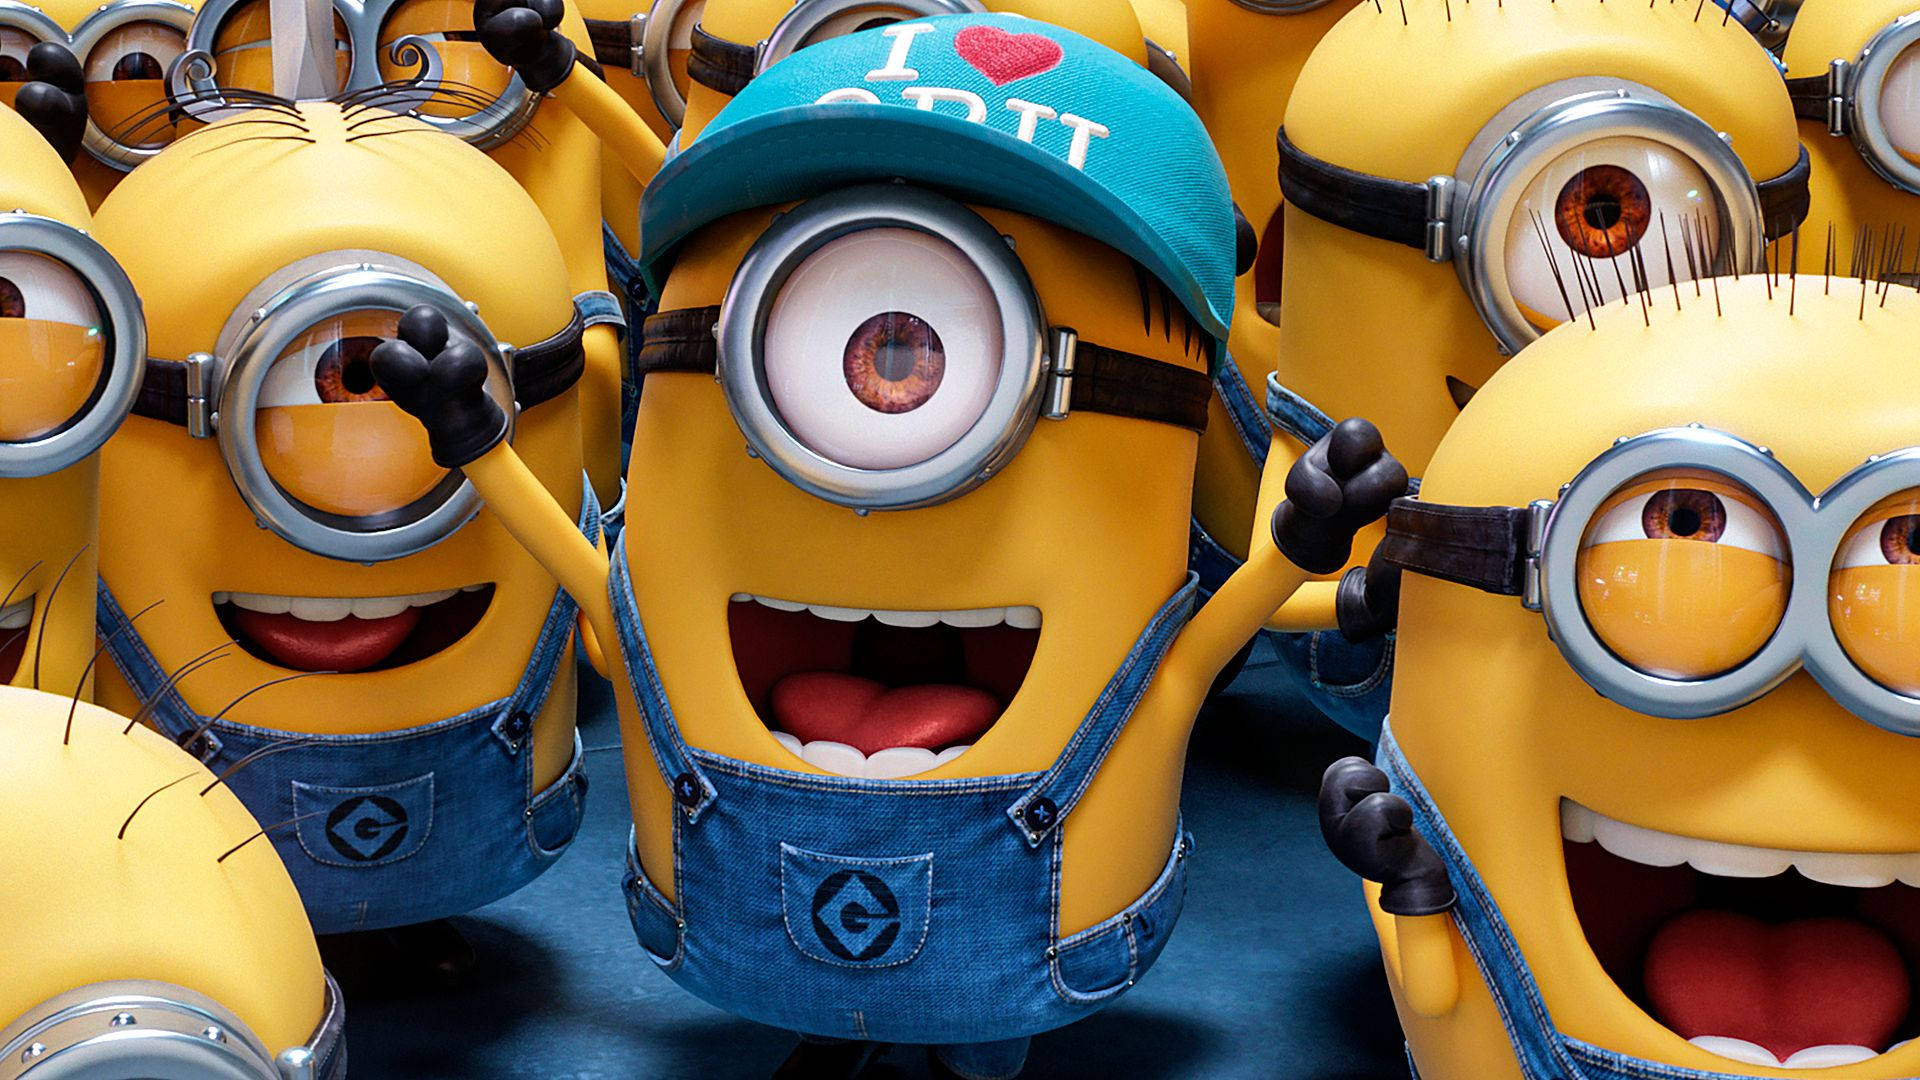 Despicable Me 3 Minions Smiling Widely Wallpaper